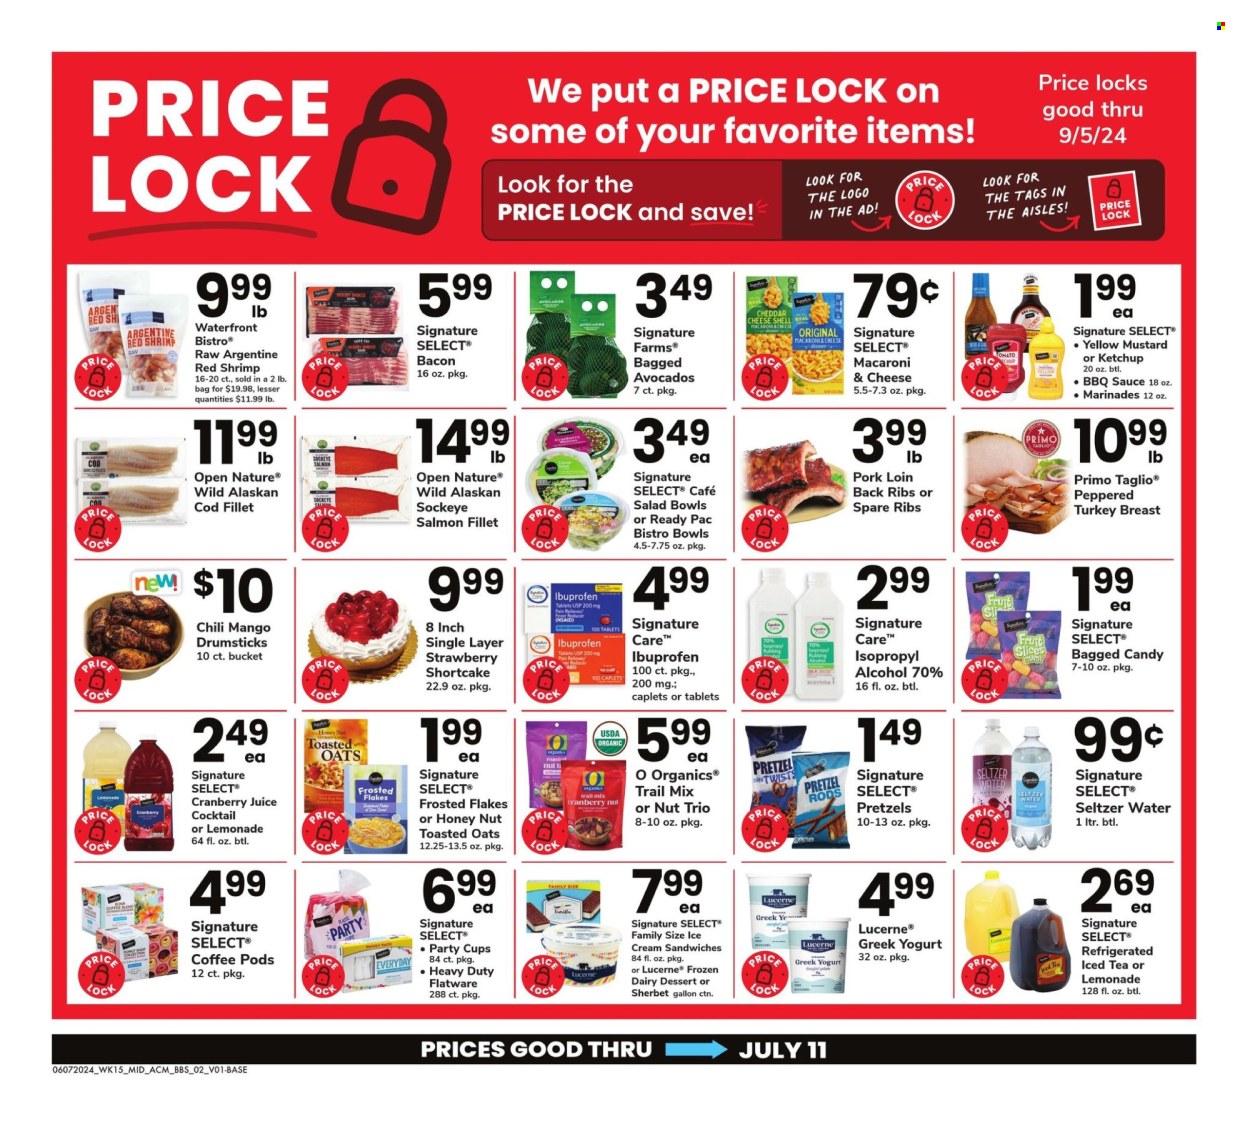 thumbnail - ACME Flyer - 06/07/2024 - 07/11/2024 - Sales products - pretzels, cake, dessert, salad, avocado, cod, fish fillets, salmon, salmon fillet, alaskan cod fillet, seafood, shrimps, macaroni & cheese, pasta, Ready Pac, ready meal, turkey breast, greek yoghurt, sherbet, ice cream sandwich, frozen dessert, Candy, Frosted Flakes, toasted oats, BBQ sauce, mustard, ketchup, marinade, sauce, trail mix, cranberry juice, lemonade, fruit drink, ice tea, seltzer water, water, coffee pods, turkey, ribs, pork loin, pork meat, pork spare ribs, bucket, flatware, salad bowl, party cups, Ibuprofen, pain therapy. Page 2.